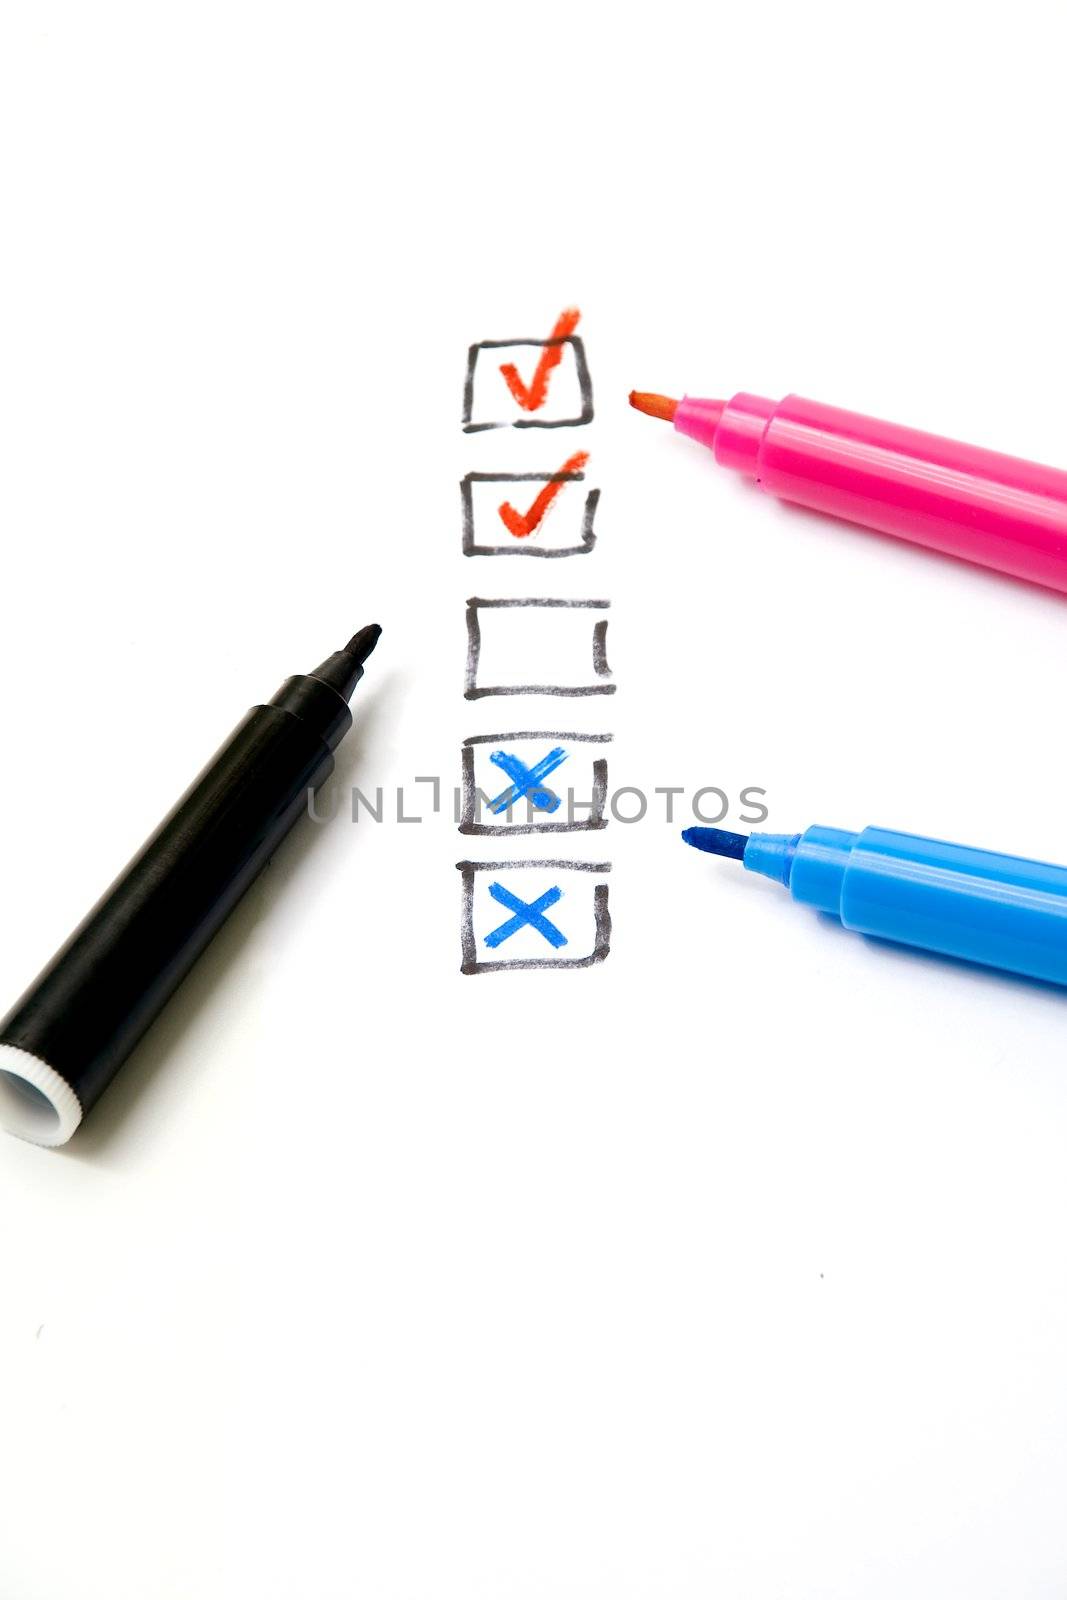 Check list and color markers on white background